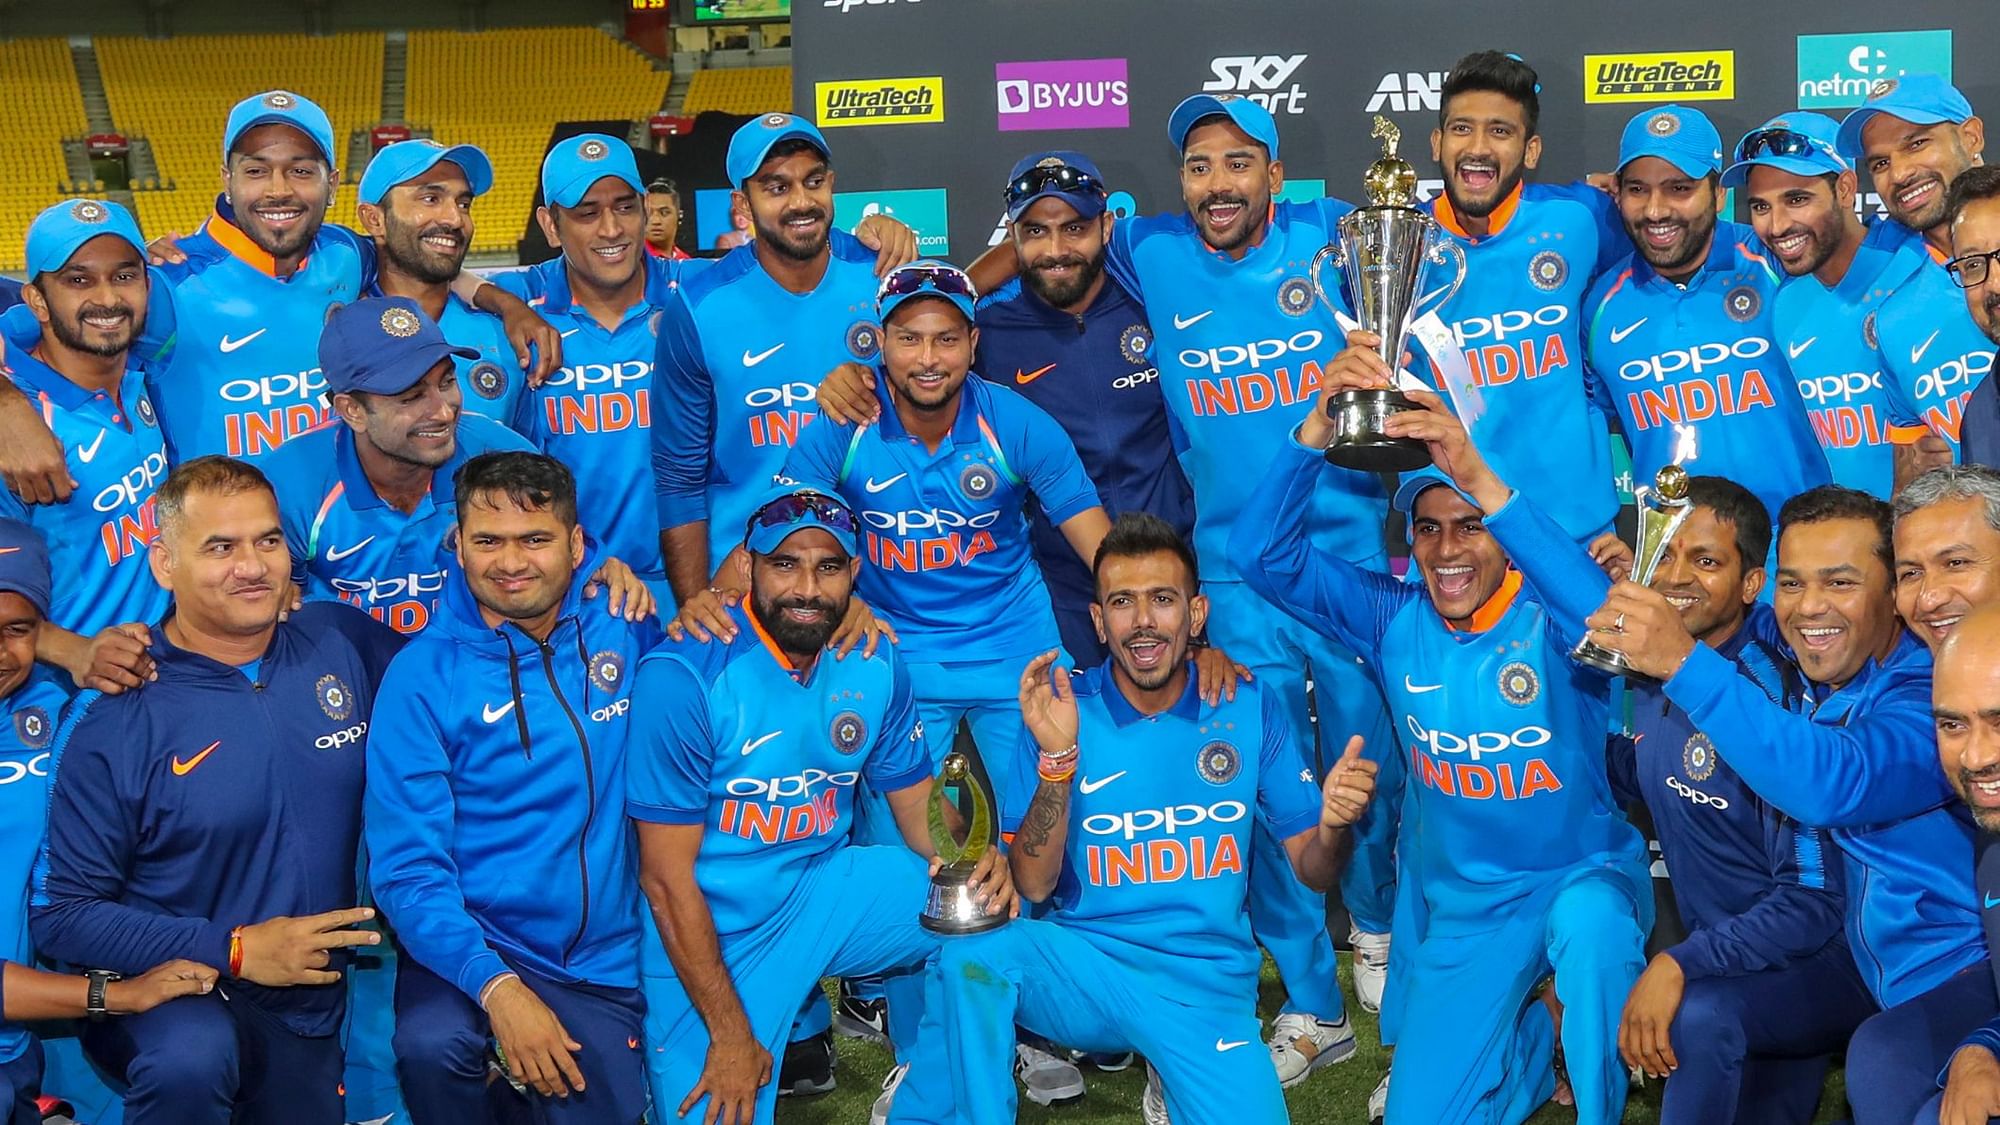 India win the fifth ODI against New Zealand by 35 runs.